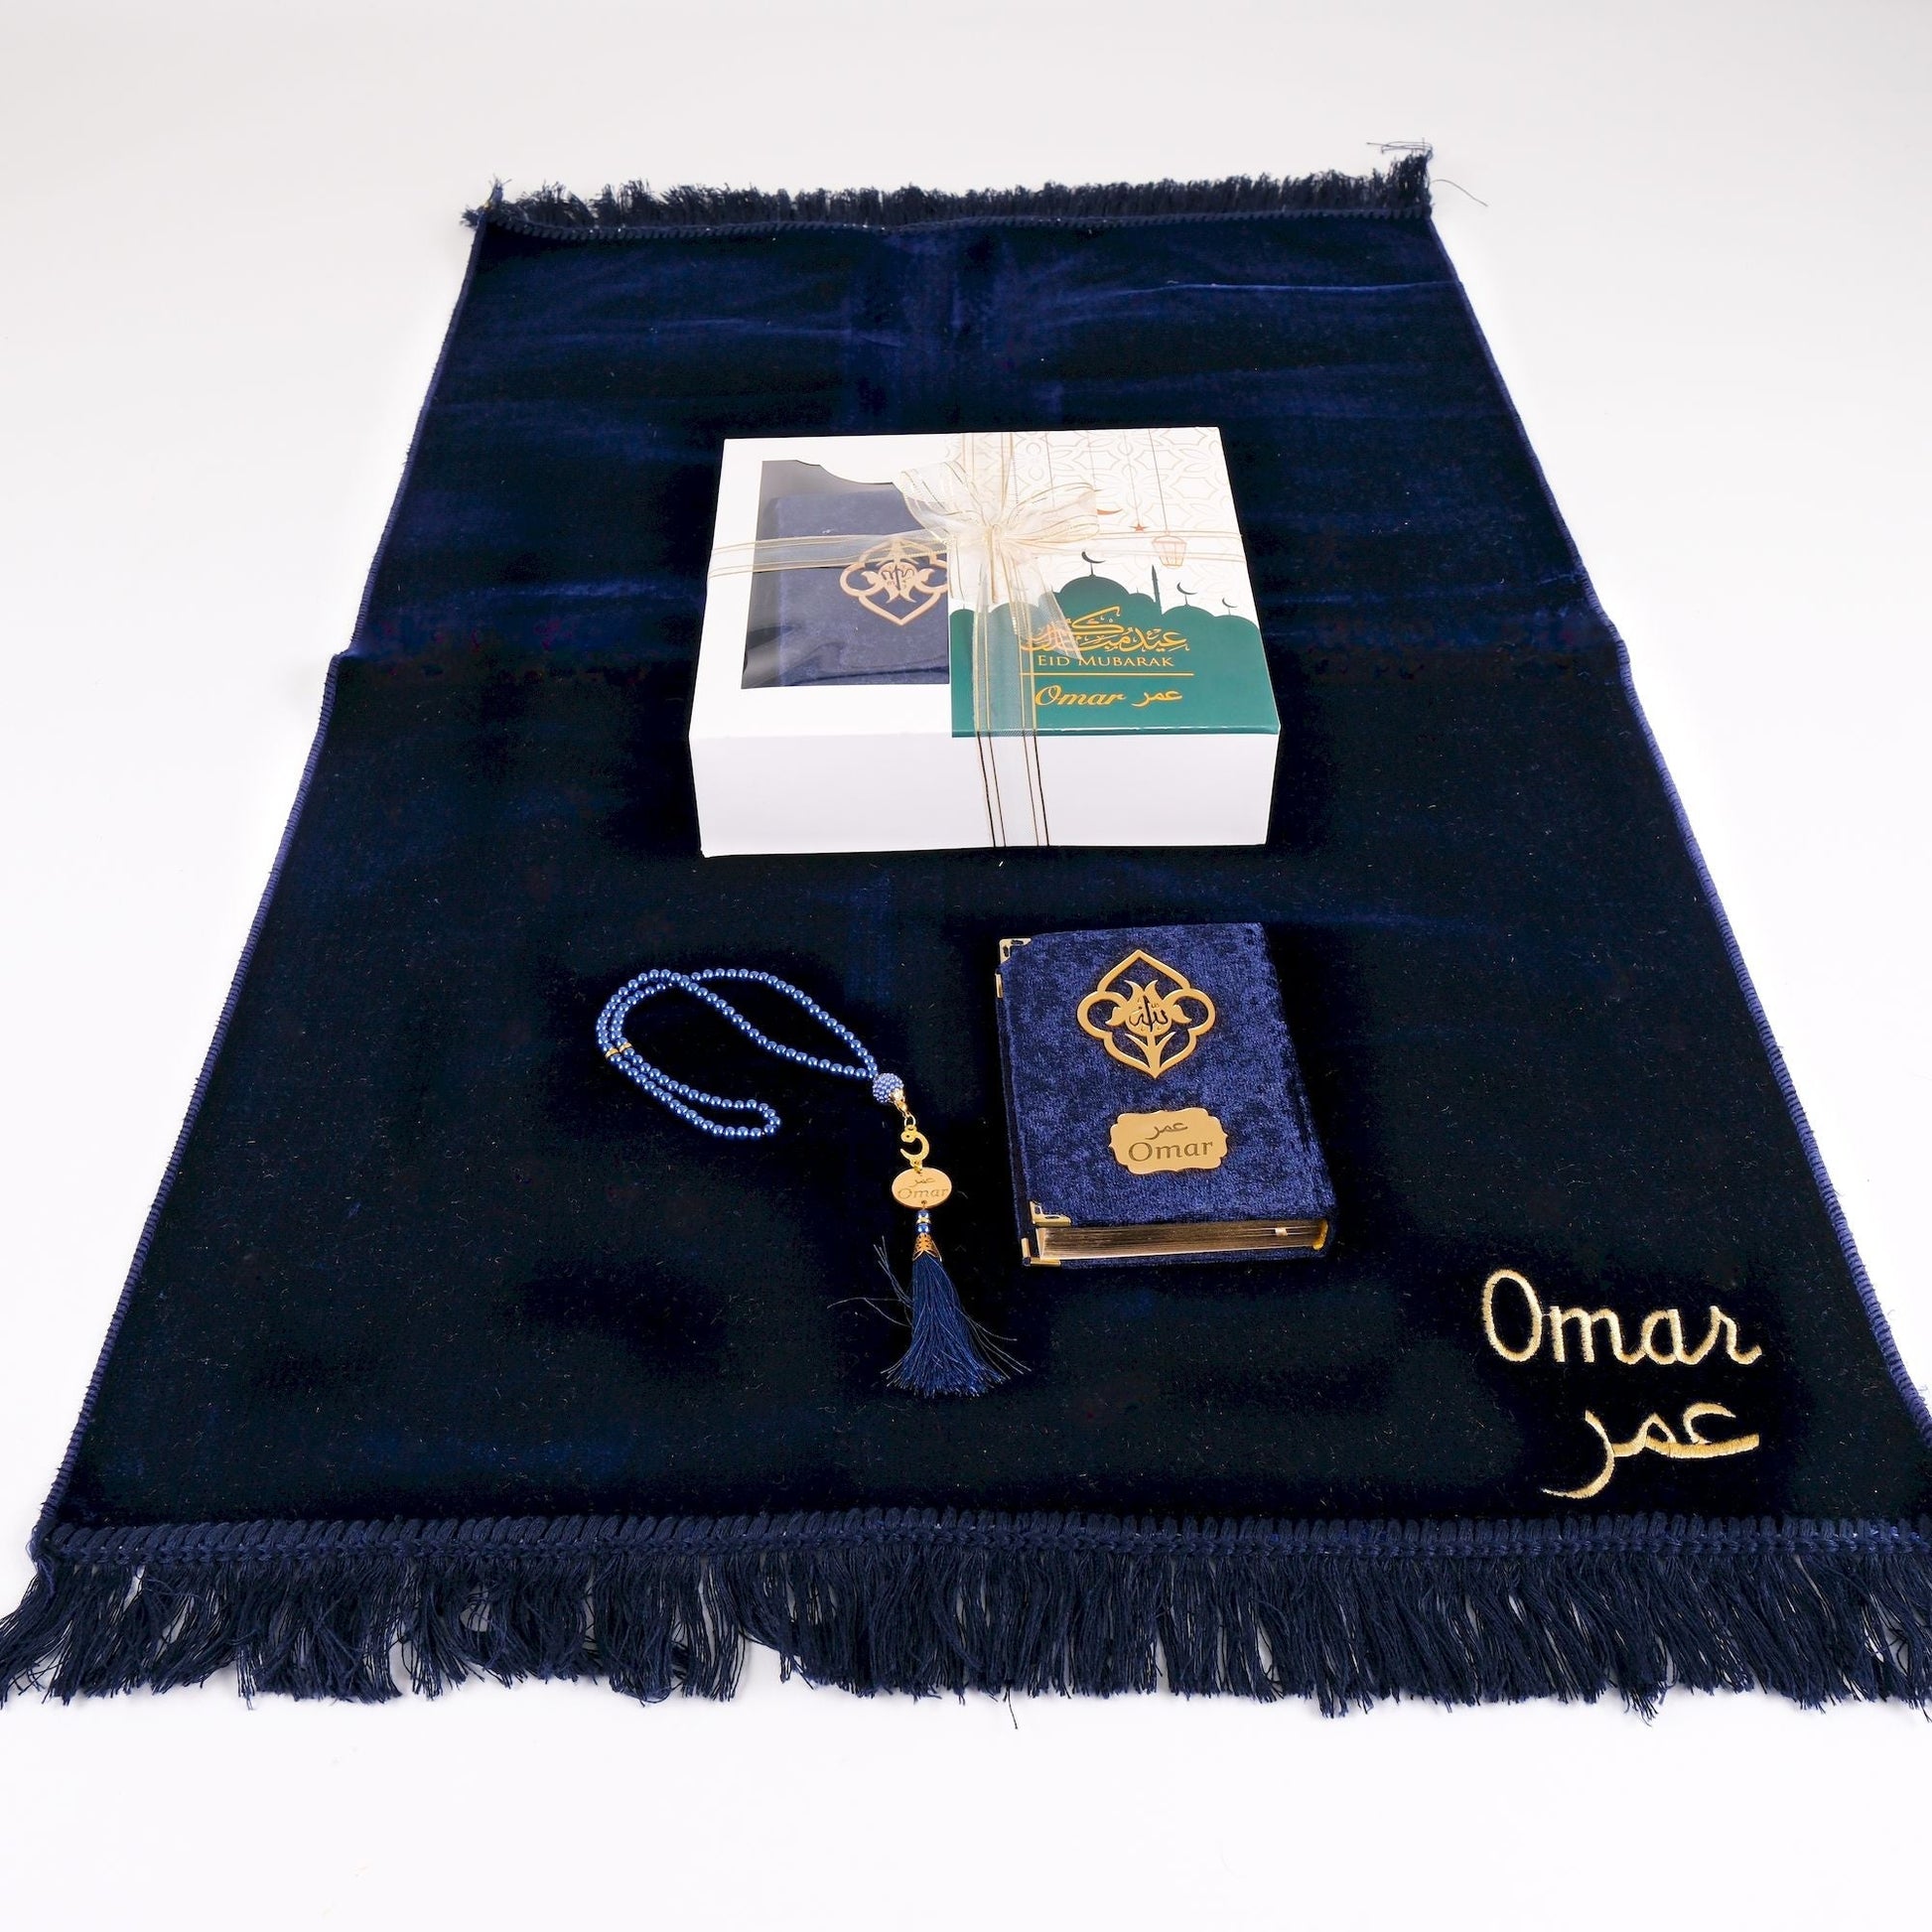 Personalized Elegant Velvet Prayer Mat Quran Tasbeeh Islamic Gift Set - Islamic Elite Favors is a handmade gift shop offering a wide variety of unique and personalized gifts for all occasions. Whether you're looking for the perfect Ramadan, Eid, Hajj, wedding gift or something special for a birthday, baby shower or anniversary, we have something for everyone. High quality, made with love.